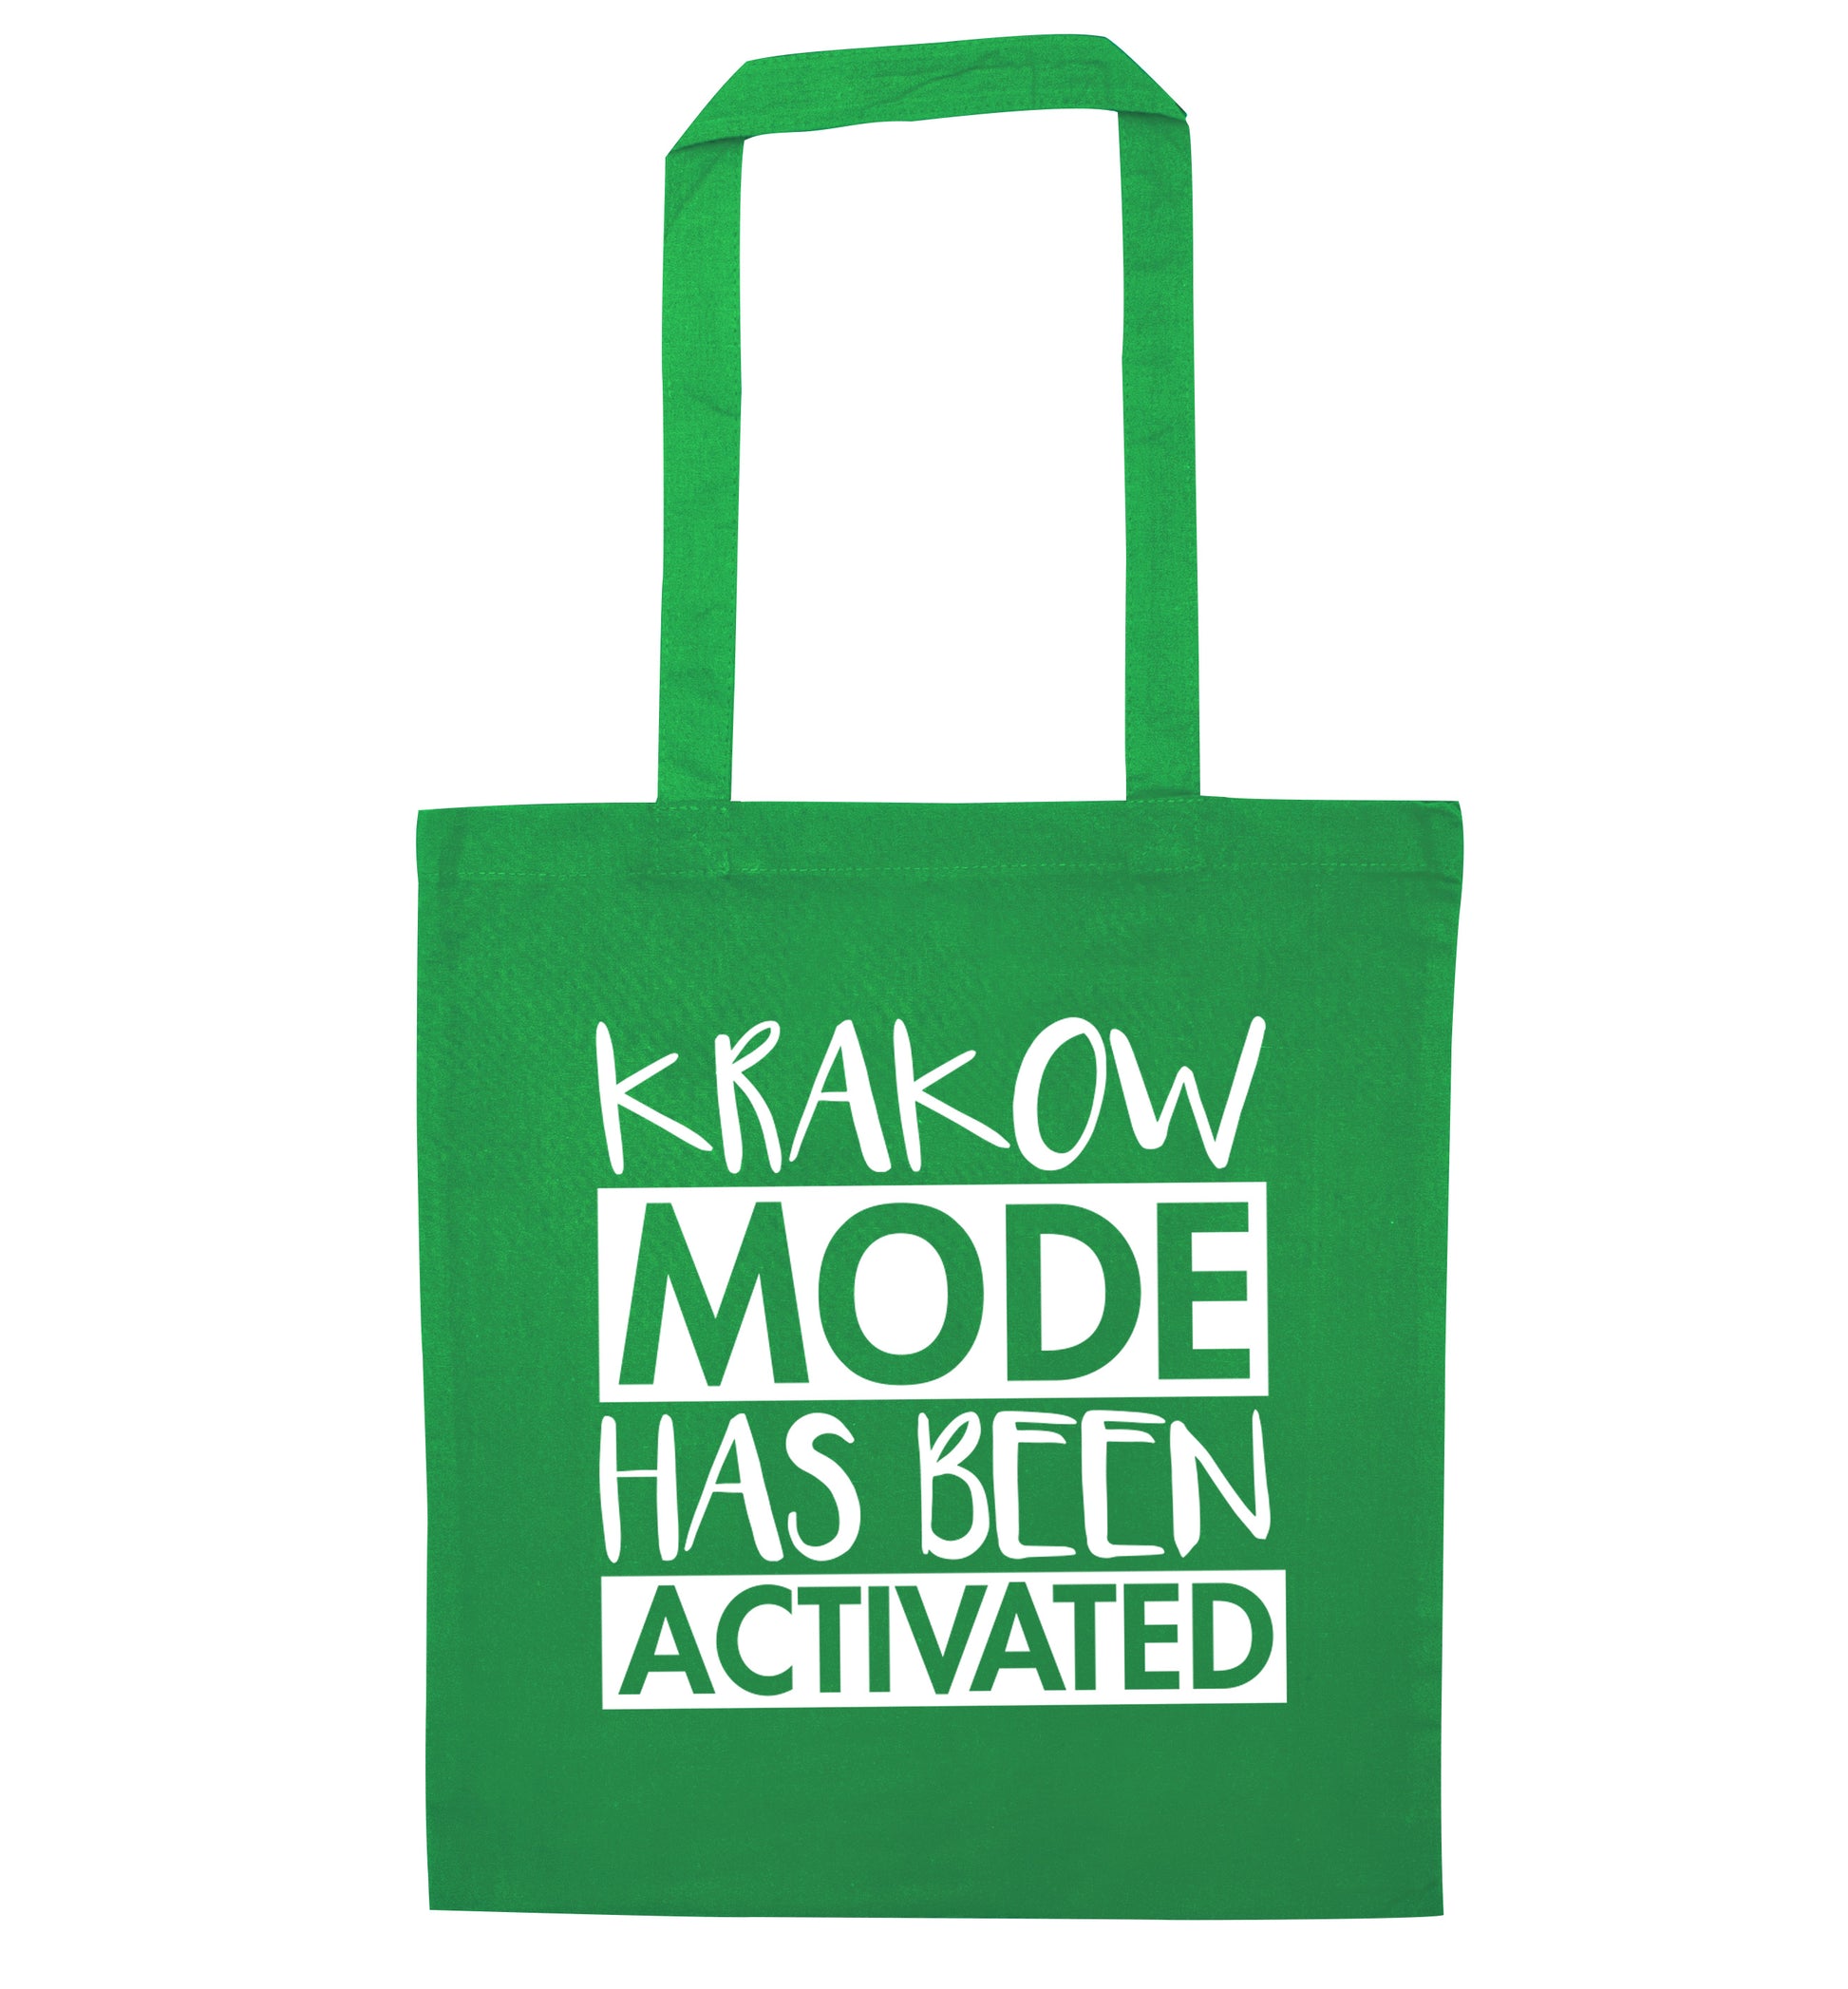 Krakow mode has been activated green tote bag